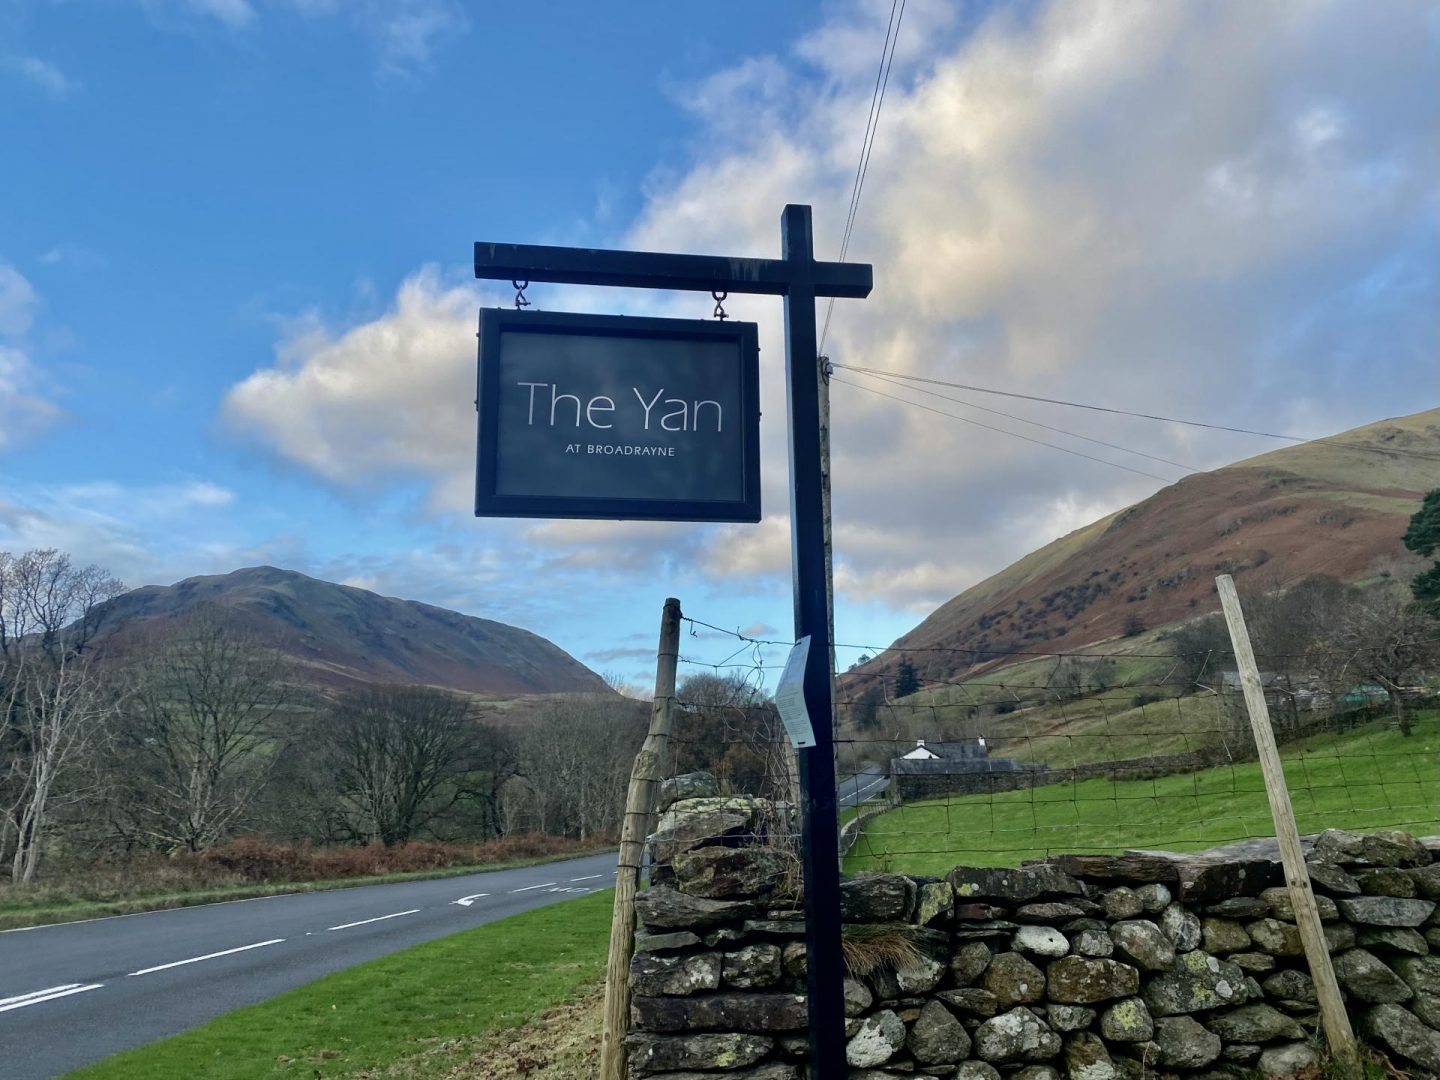 The Yan Grasmere boutique hotel review